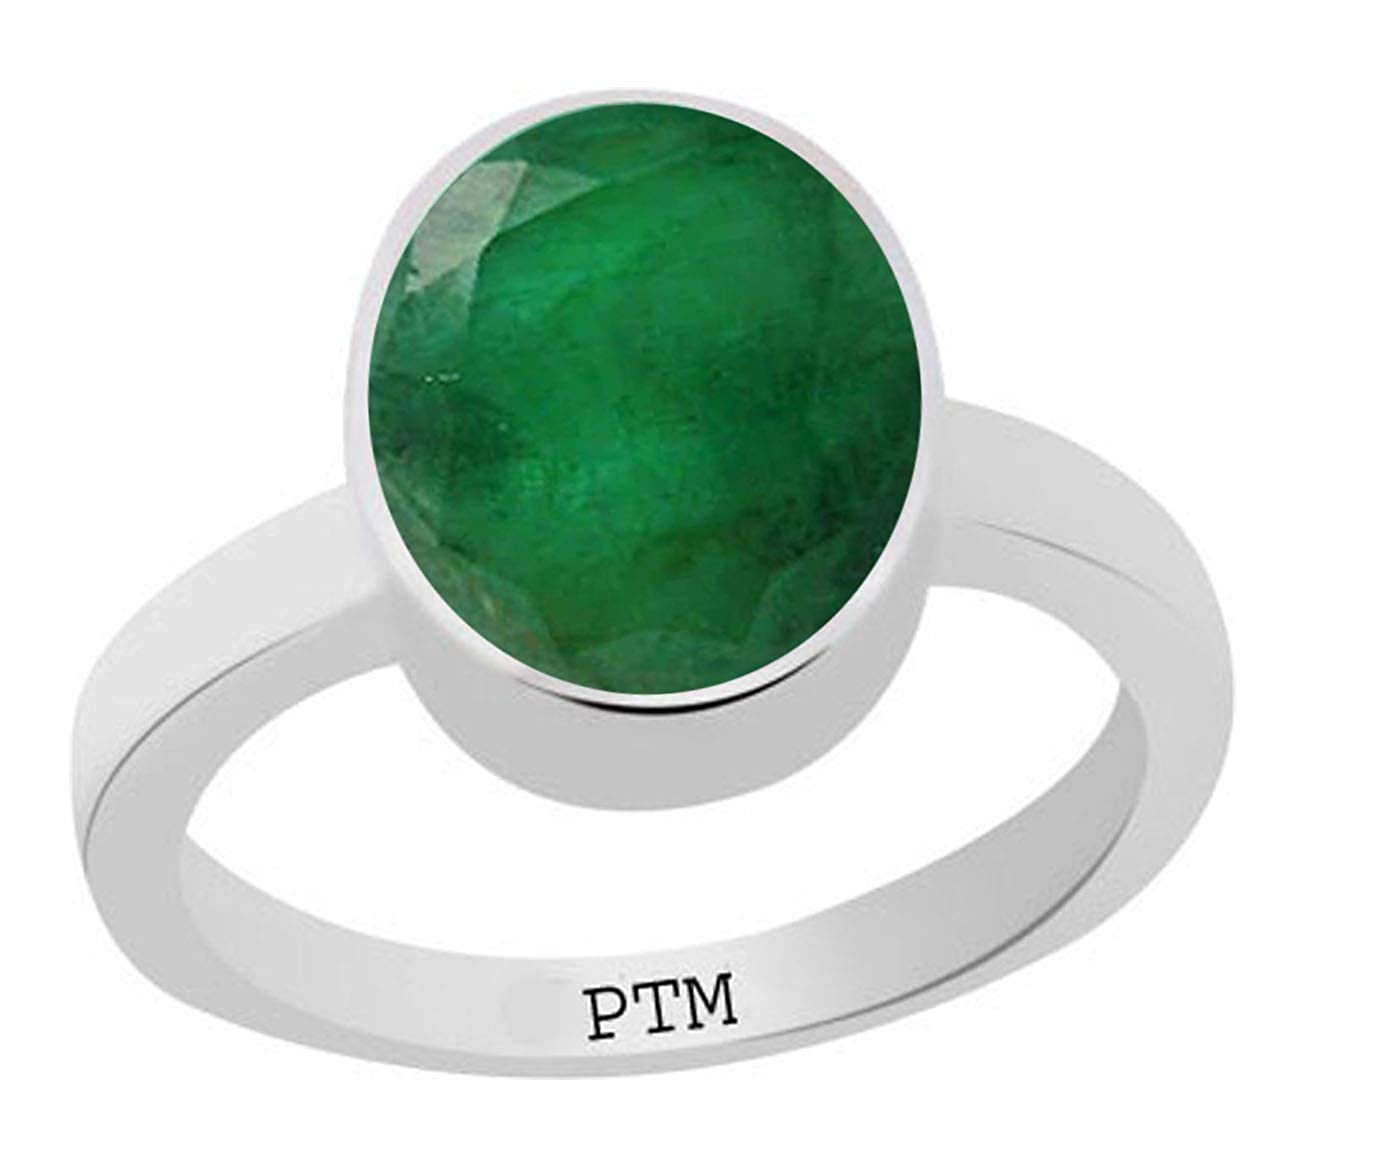 The Monumental Emerald Gold Ring